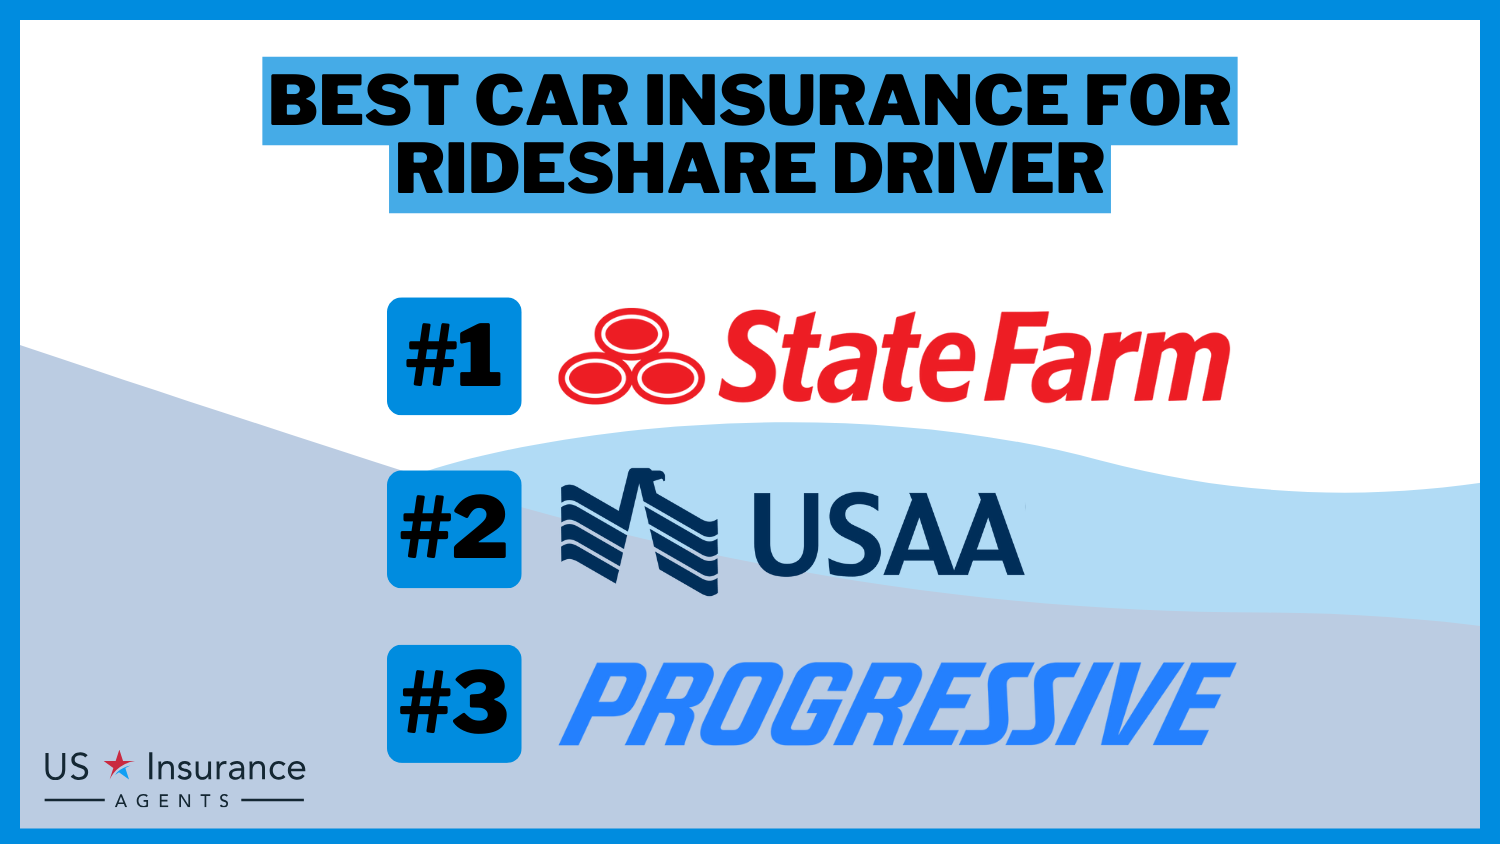 Best Car Insurance for Rideshare Driver: State Farm, USAA and Progressive.